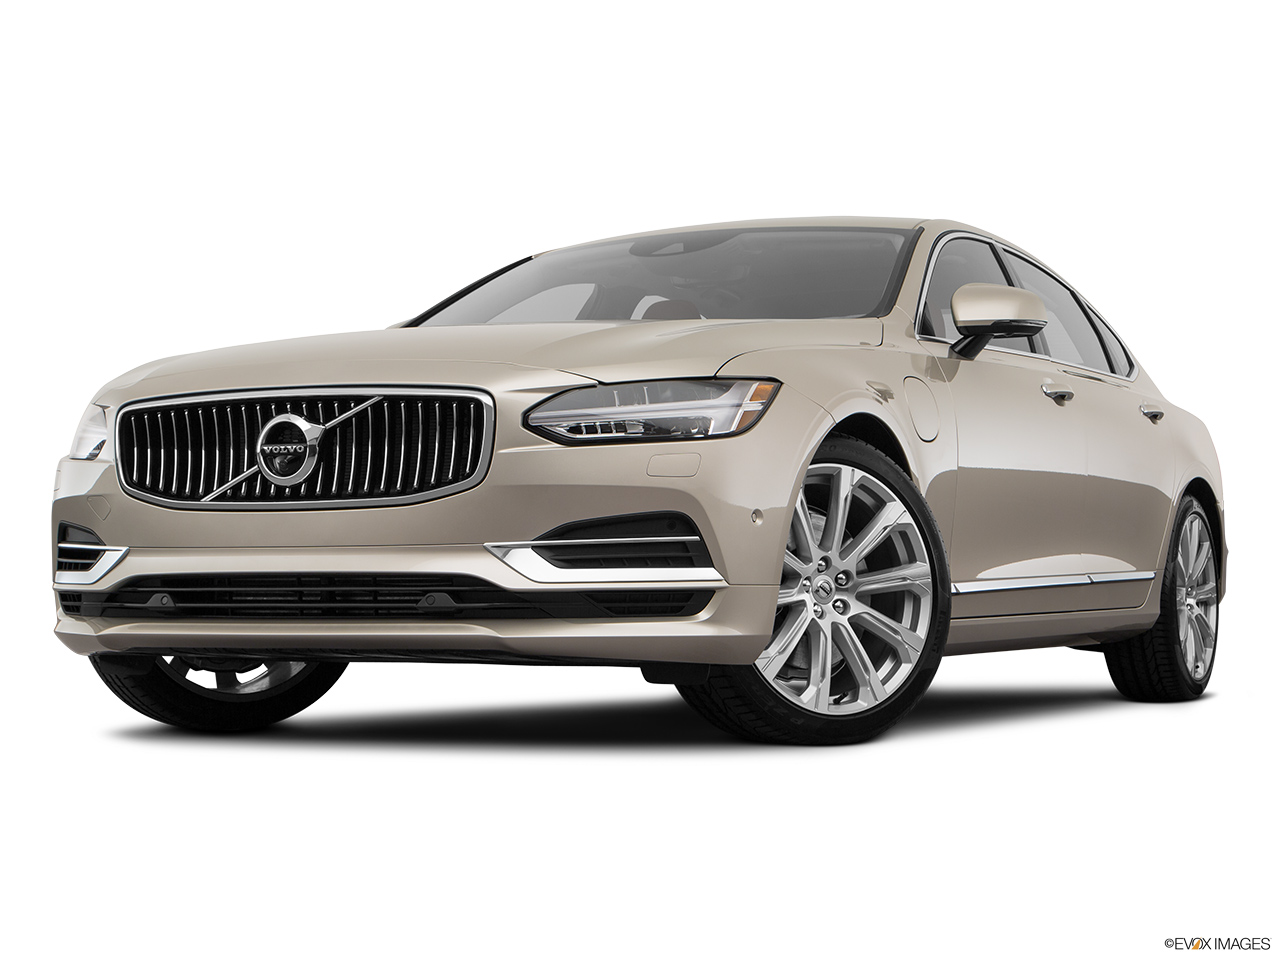 2018 Volvo S90 T8 Inscription eAWD Plug-in Hybrid Front angle view, low wide perspective. 